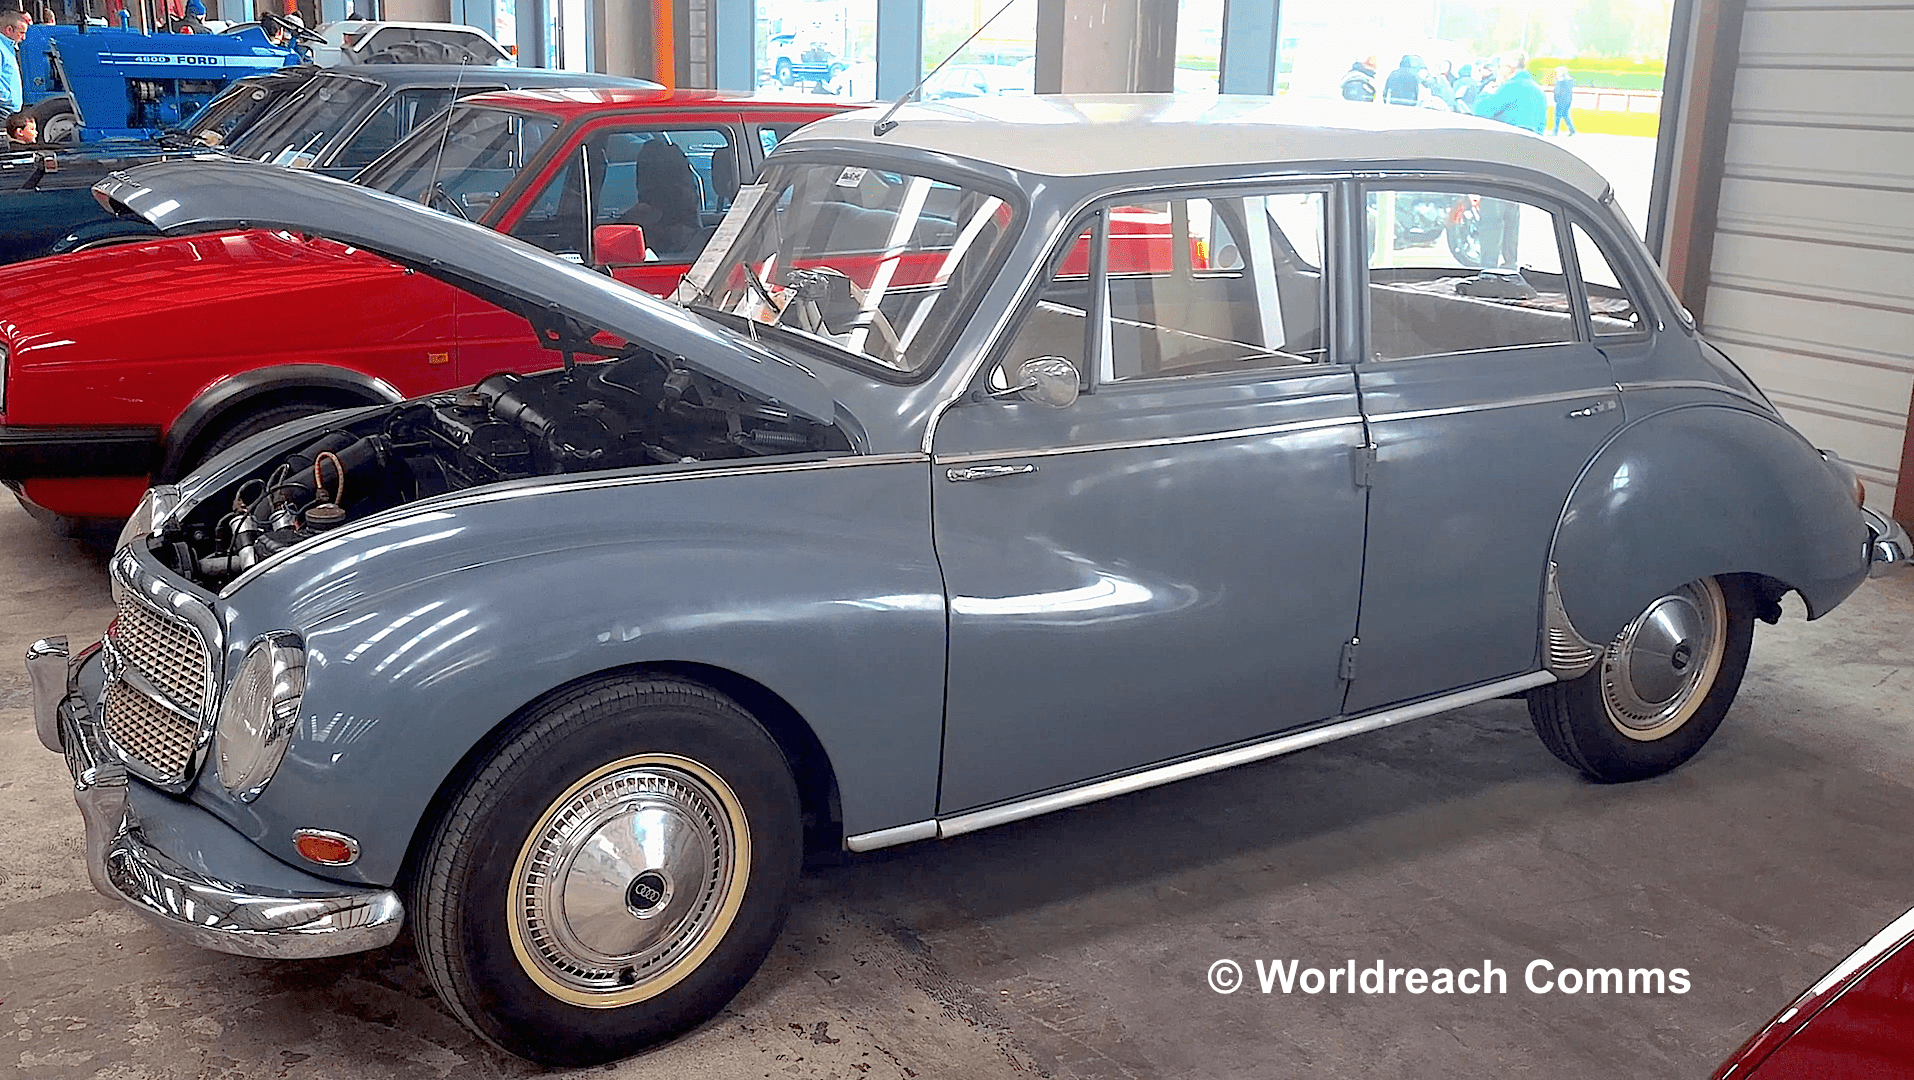 DKW Auto Union car assembled in Cork in the ’50s | Season 3 – Episode 6